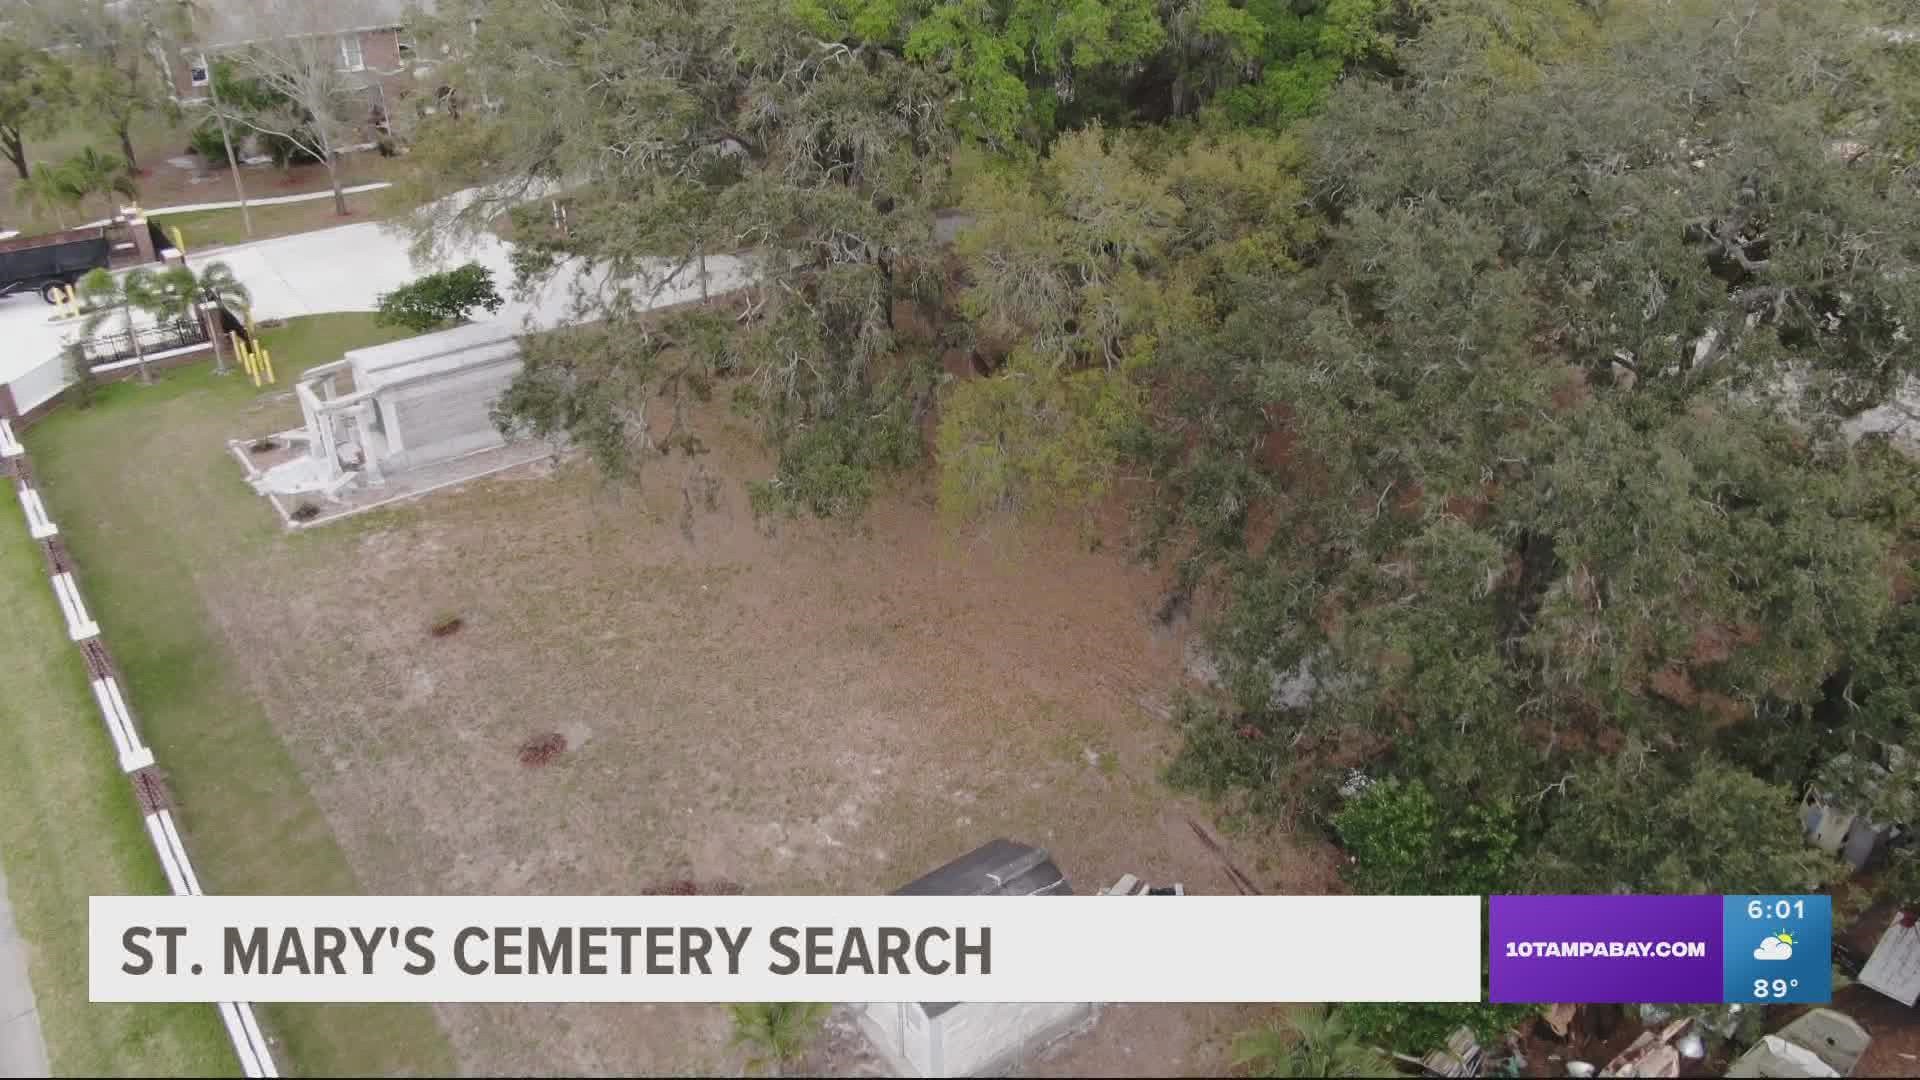 Archaeologists say the probability is high that graves are on the property. The Diocese of St. Petersburg insists all graves were moved.